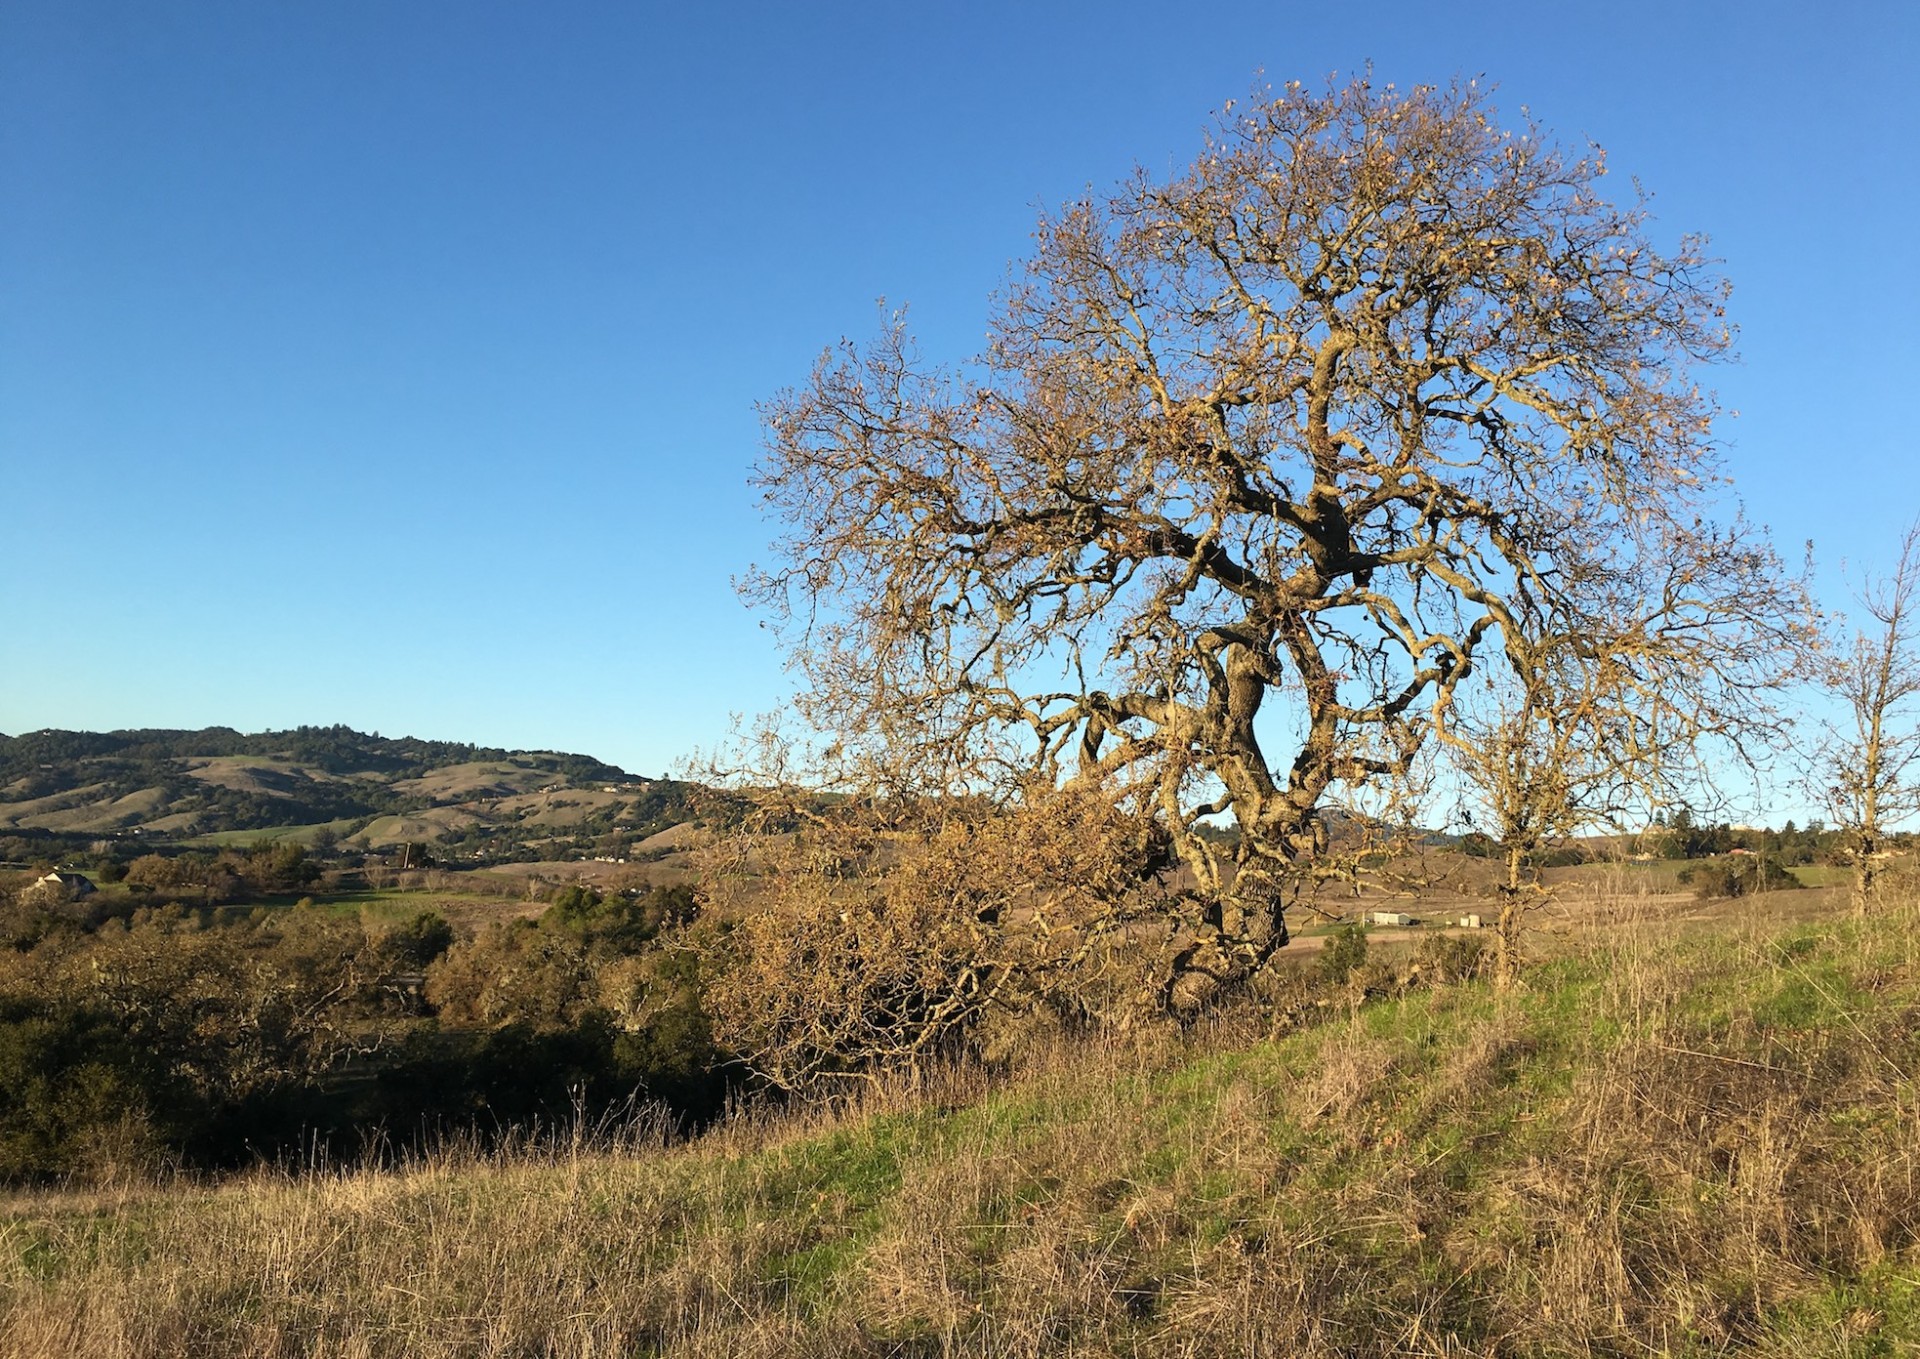 A tree and rolling hills landscape in Northern California